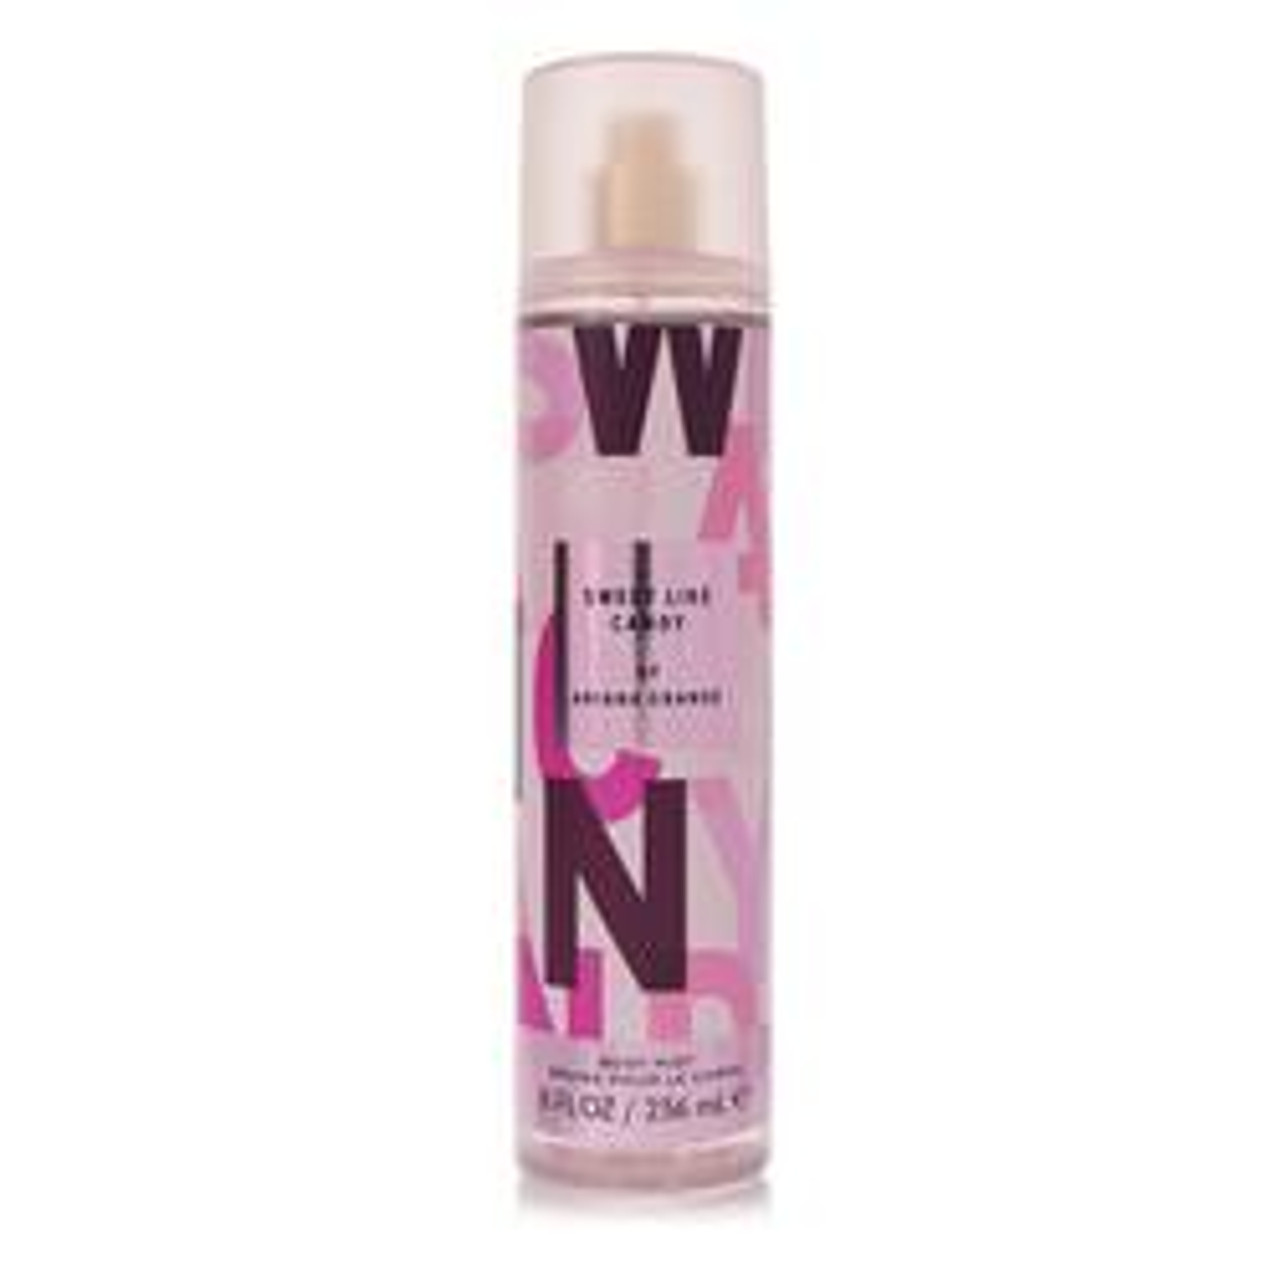 Sweet Like Candy Perfume By Ariana Grande Body Mist Spray 8 oz for Women - [From 39.00 - Choose pk Qty ] - *Ships from Miami